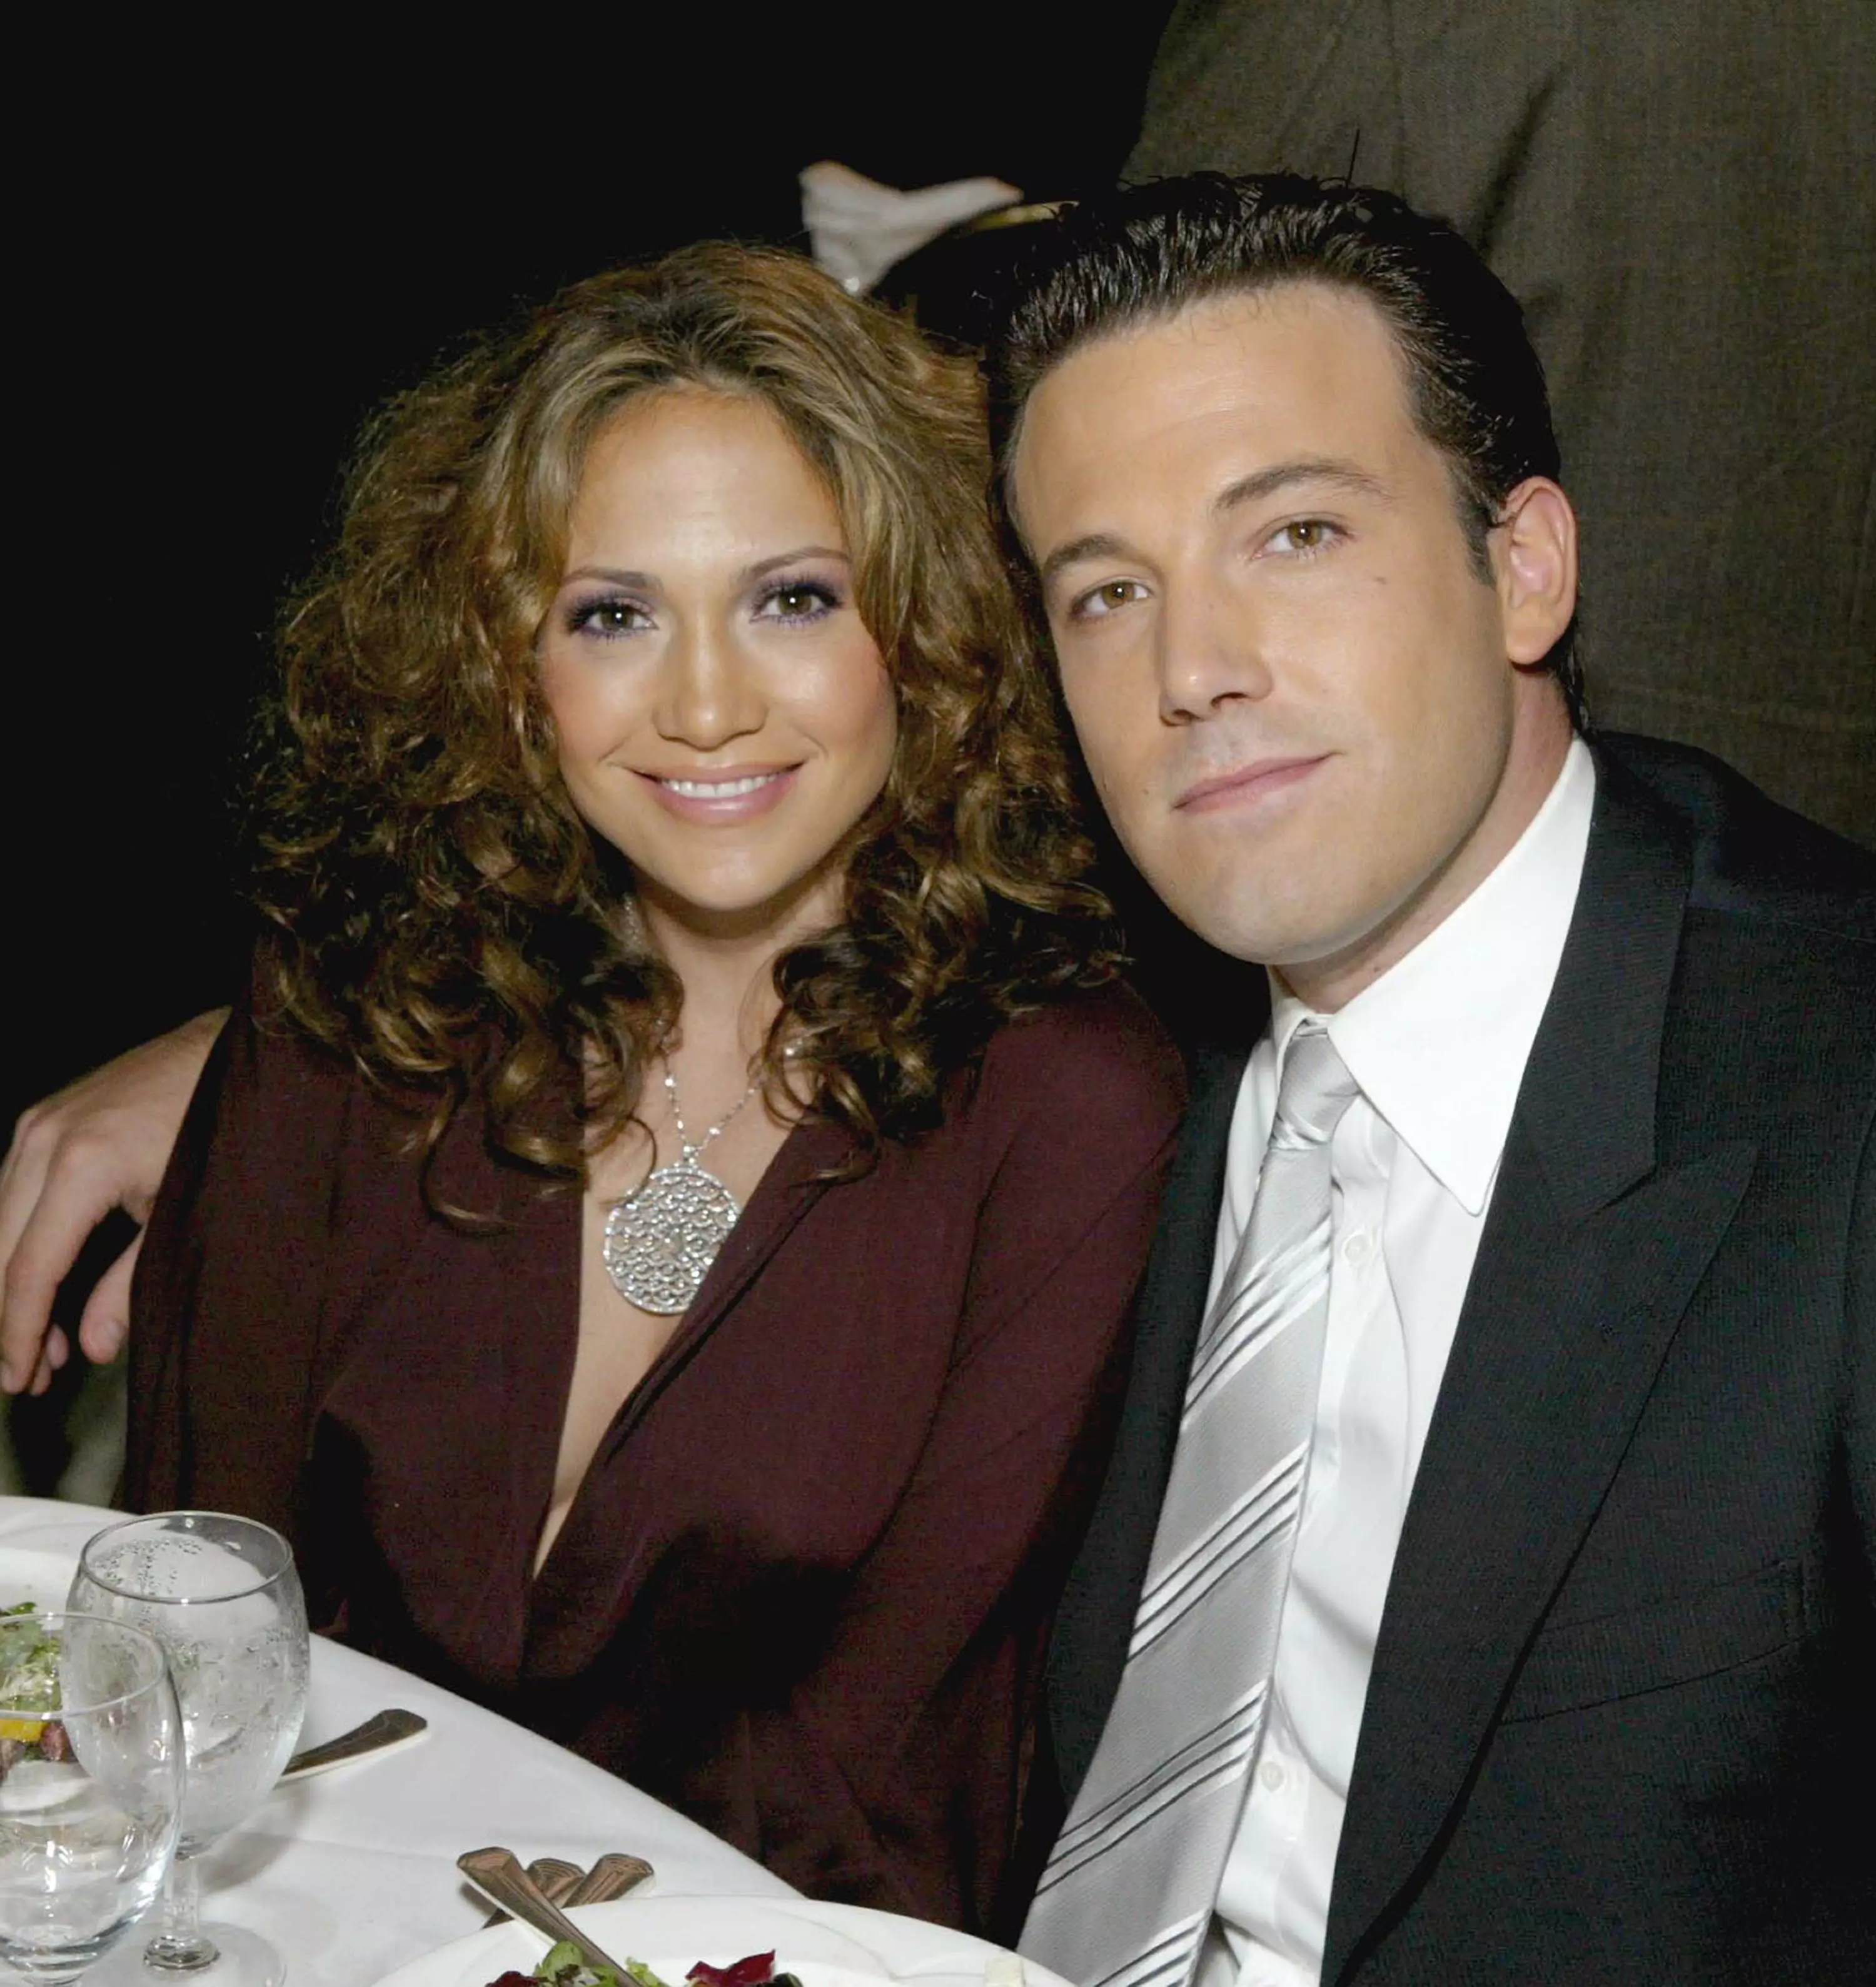 Ben and JLO dated in 2002-2003 (